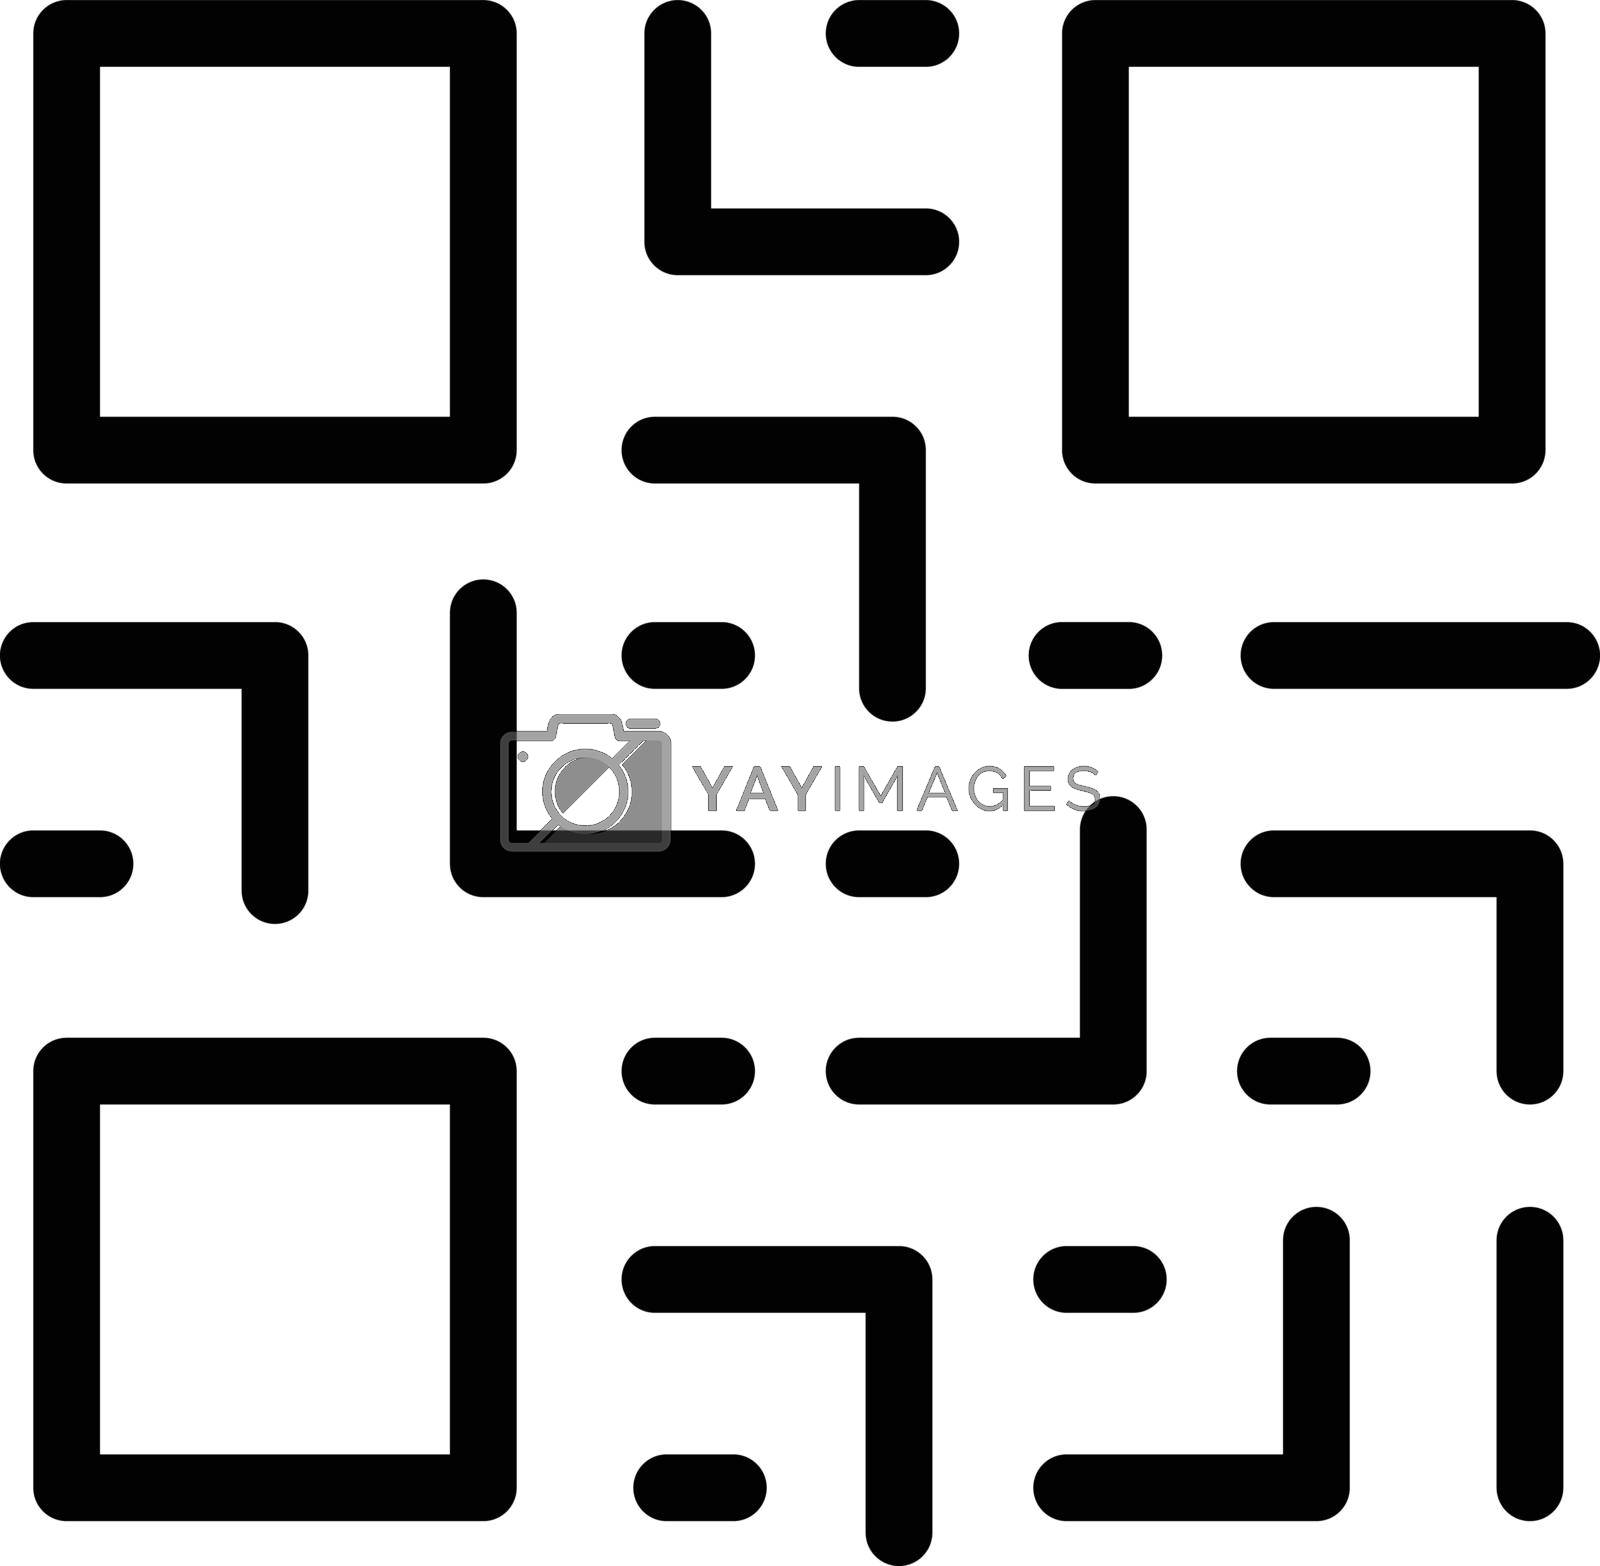 Royalty free image of qr code by FlaticonsDesign